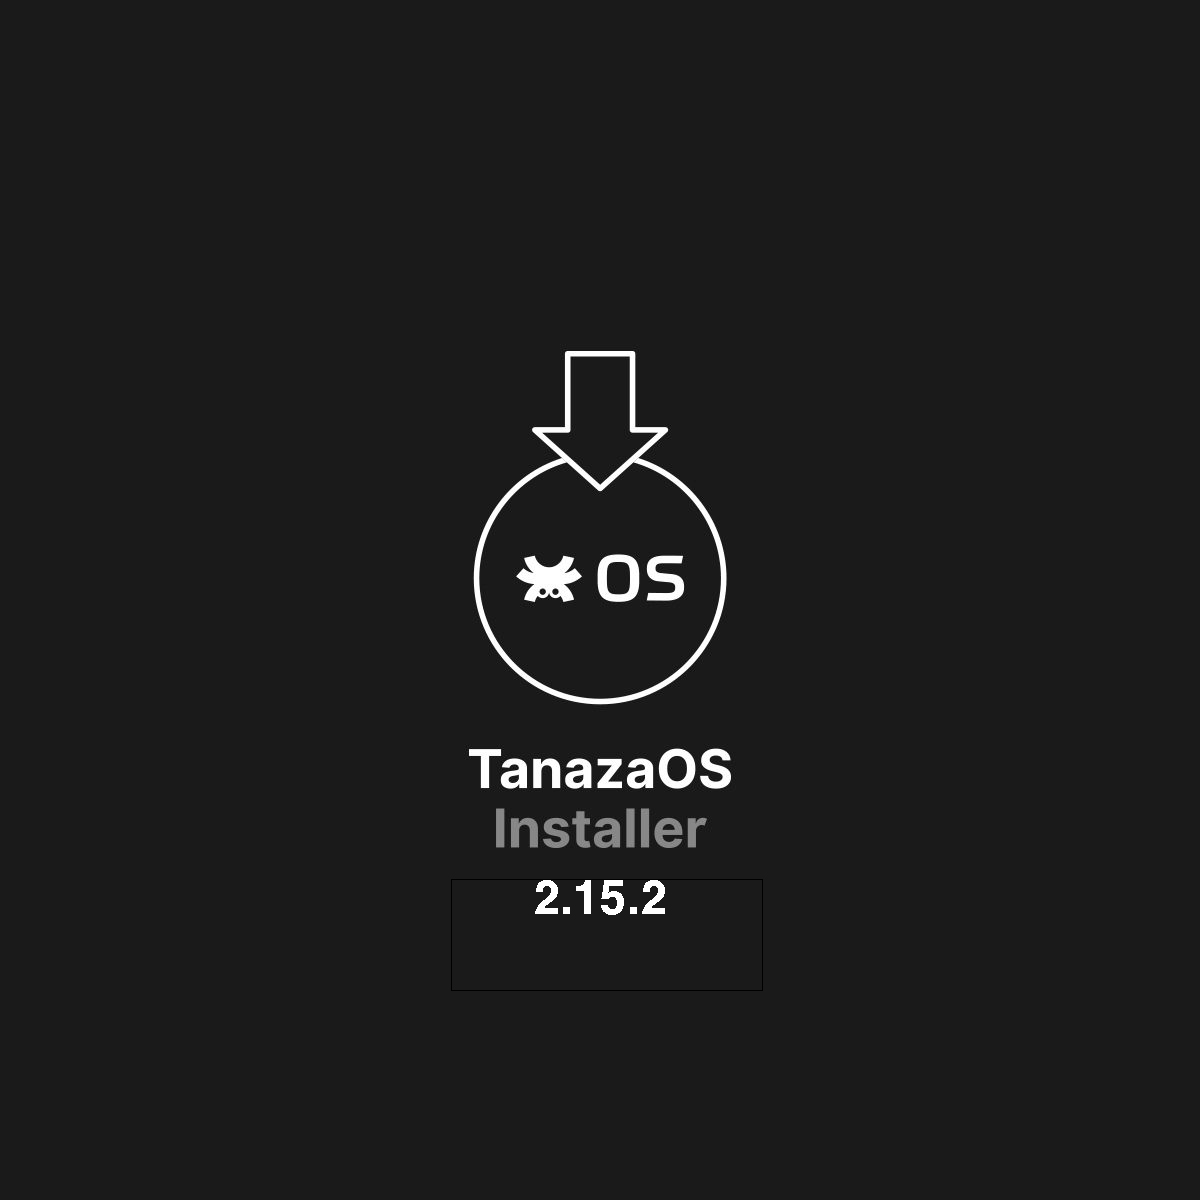 Tanaza Installer 2.15.2 - Access Point Configuration in Under 3 Minutes